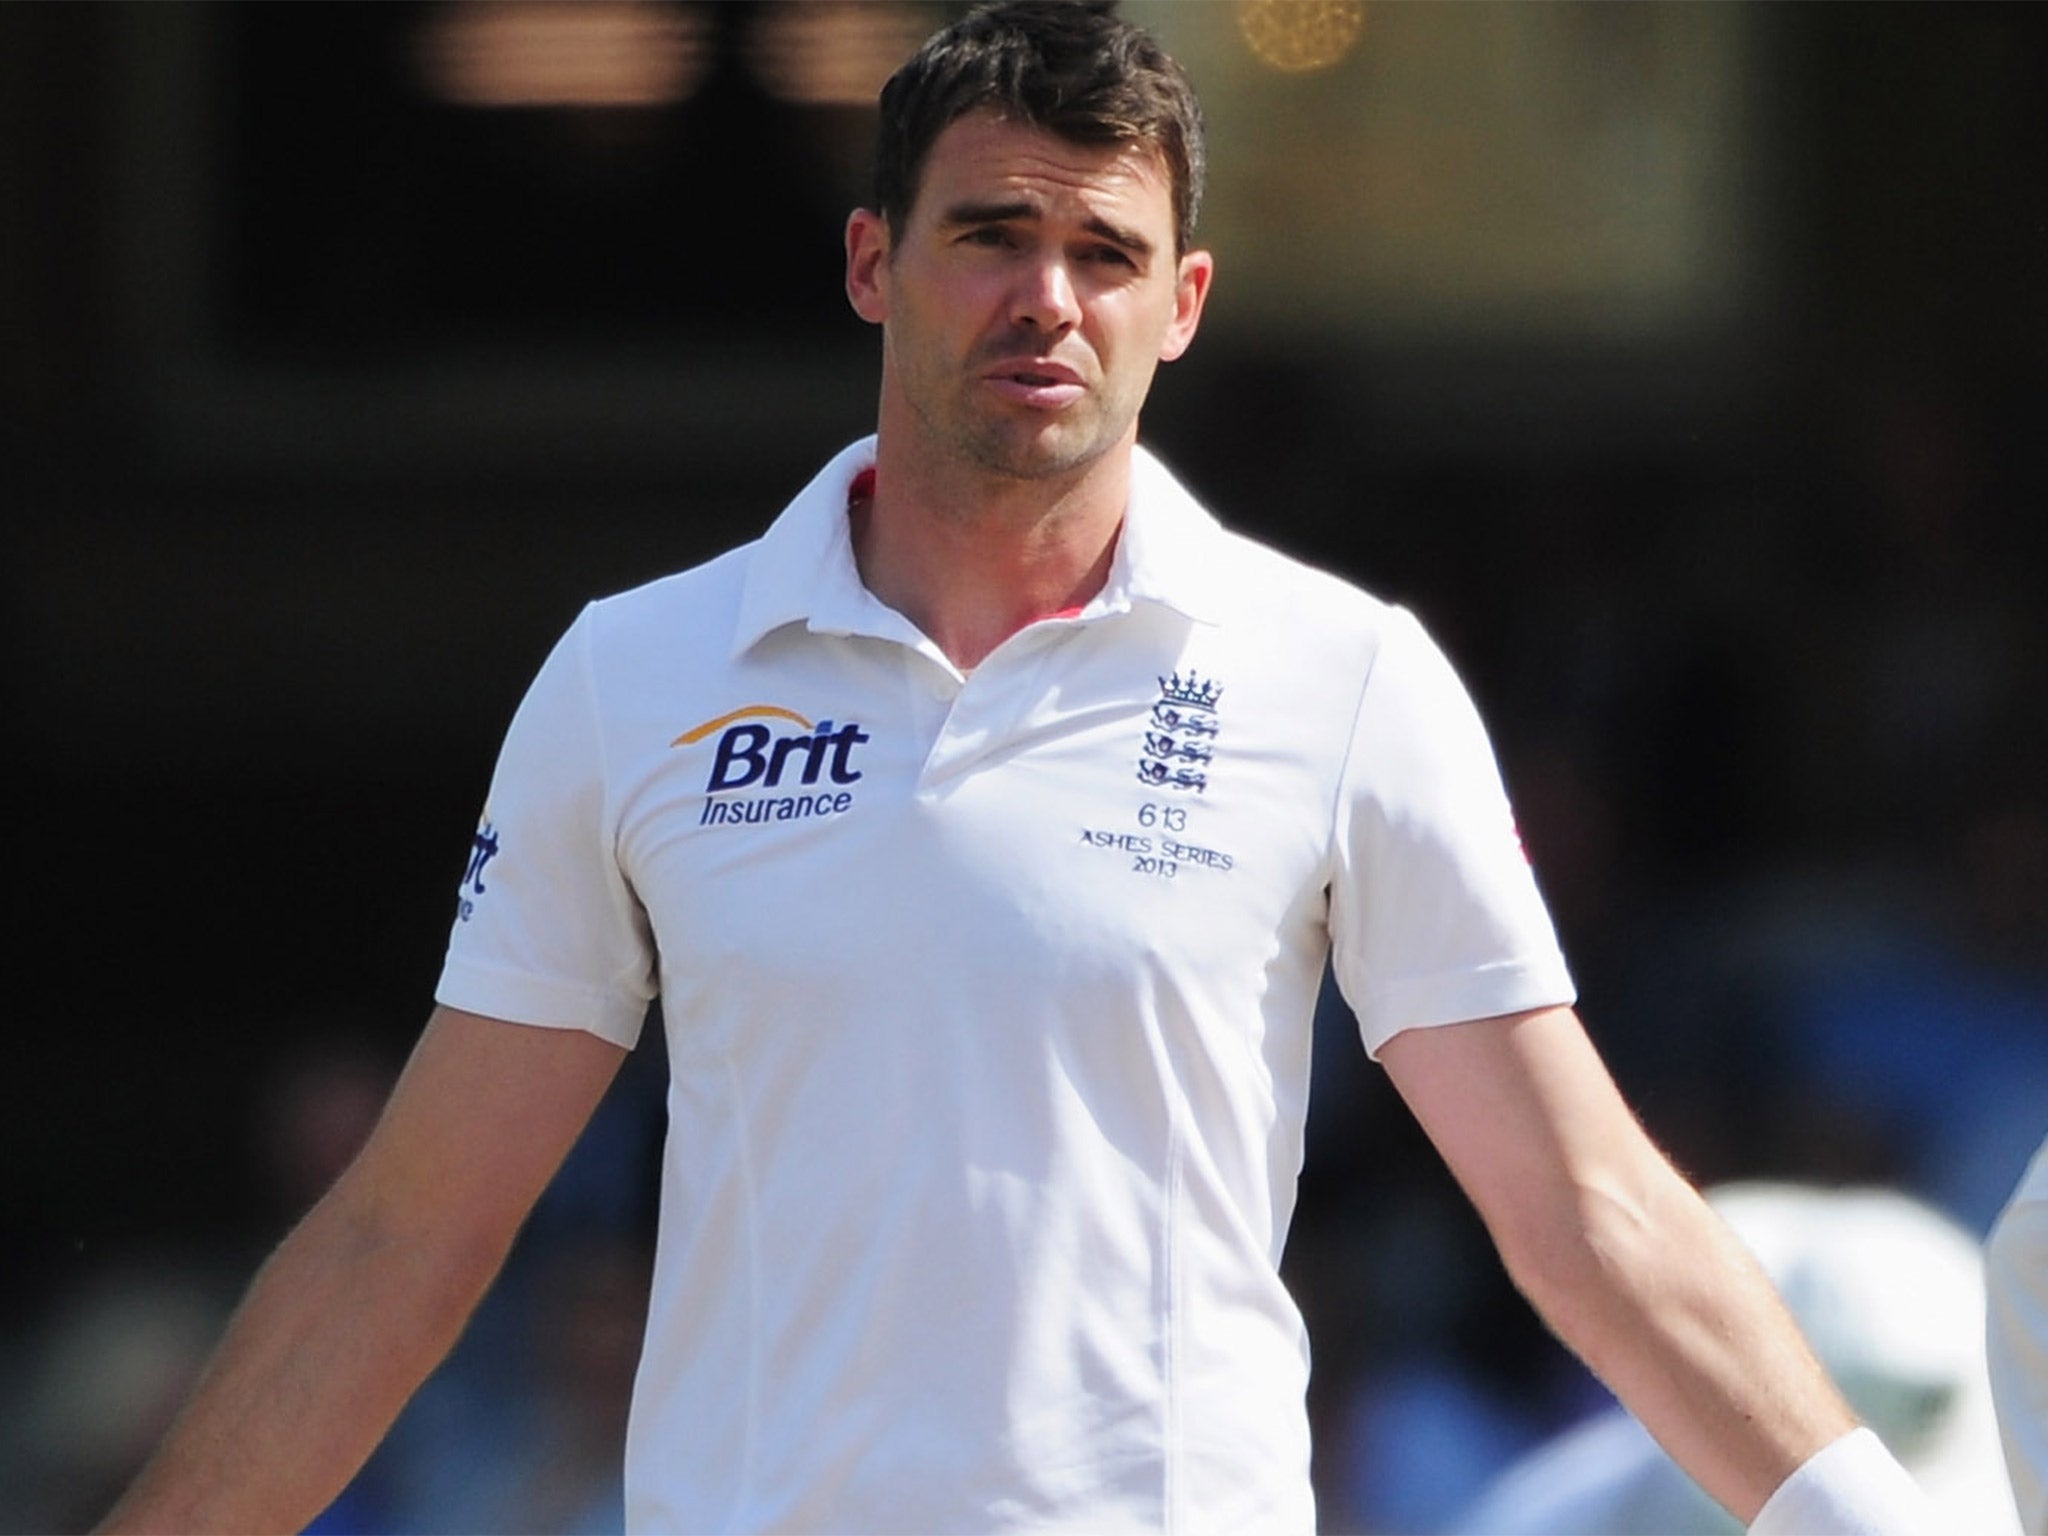 Jimmy Anderson suffered with a knee injury all summer and will miss the one-day tour of Sri Lanka